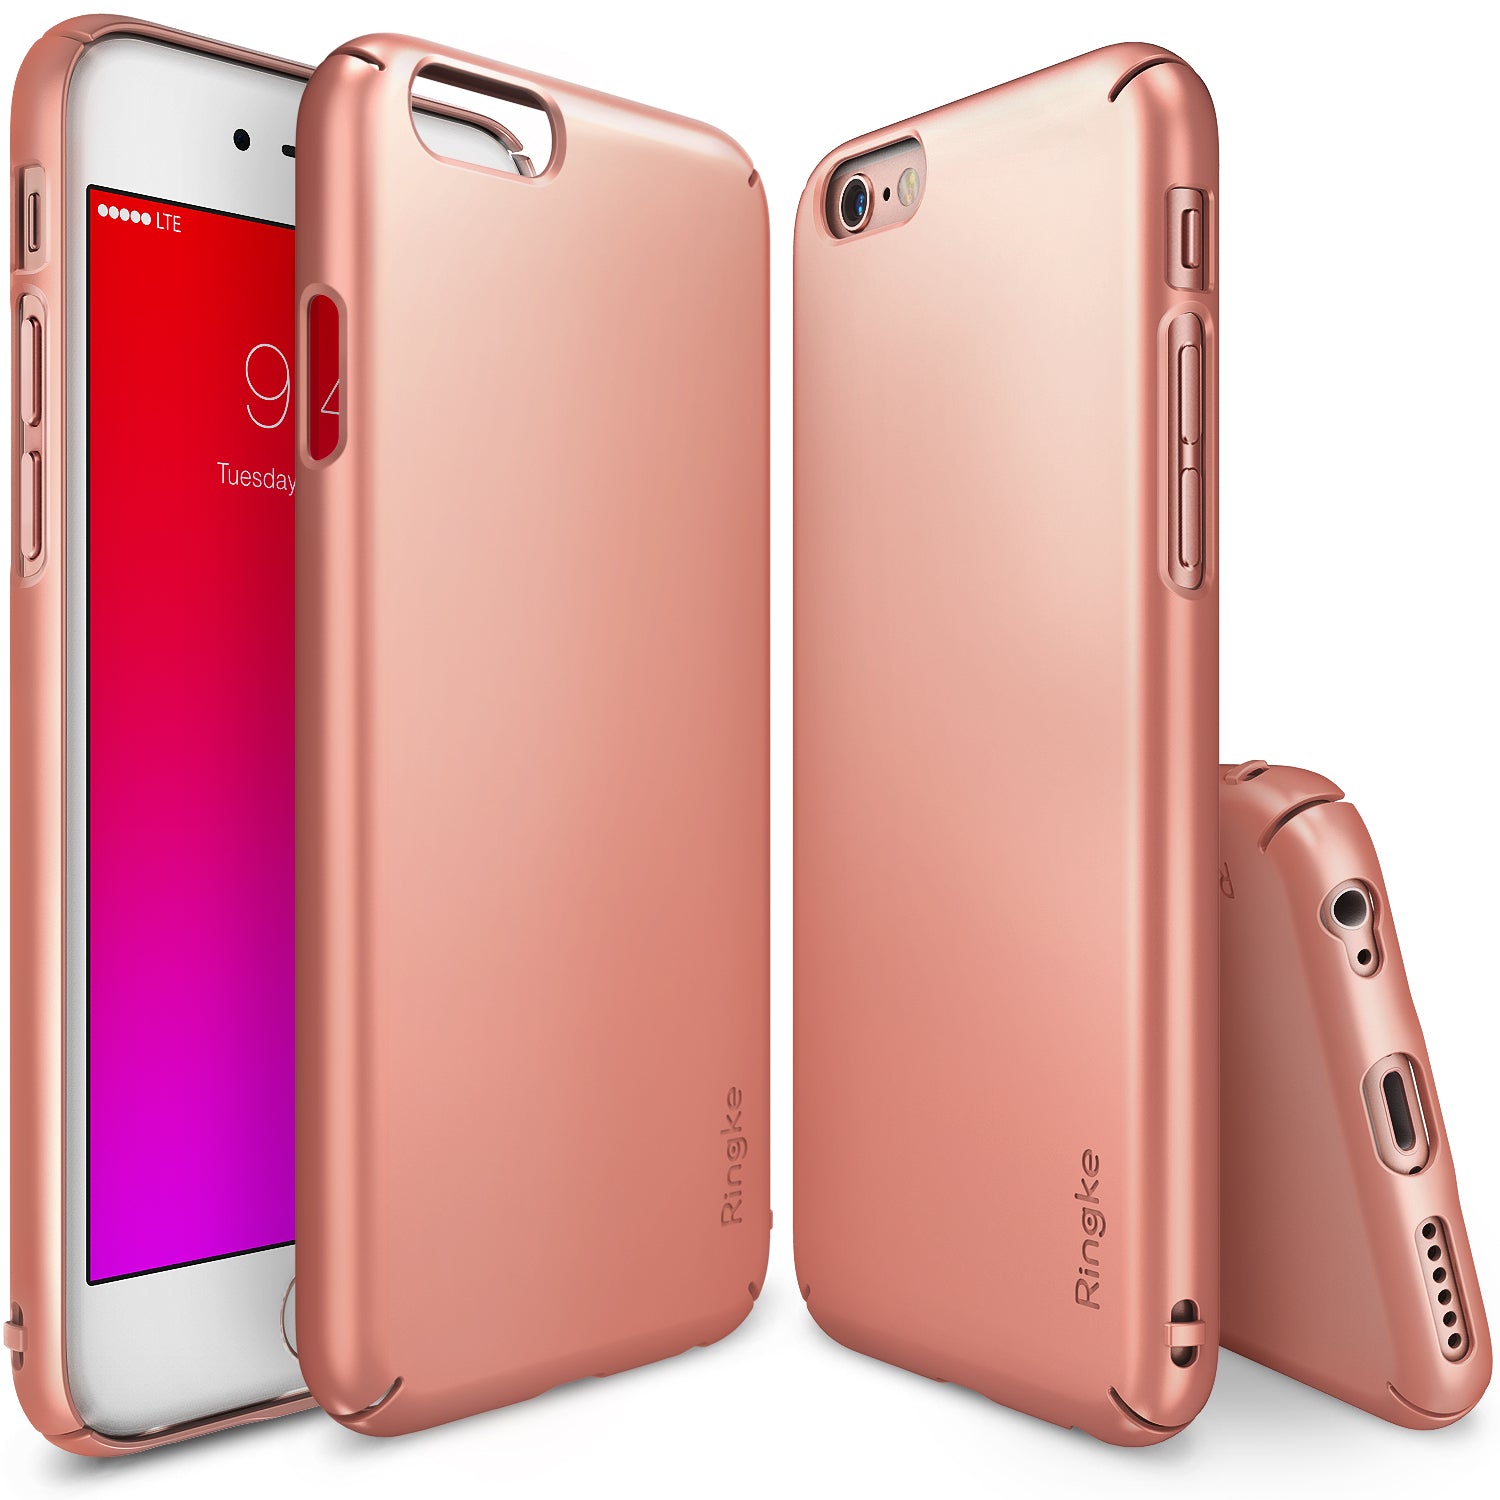 ringke slim lightweight hard pc thin case cover for iphone 6s plus main rose gold